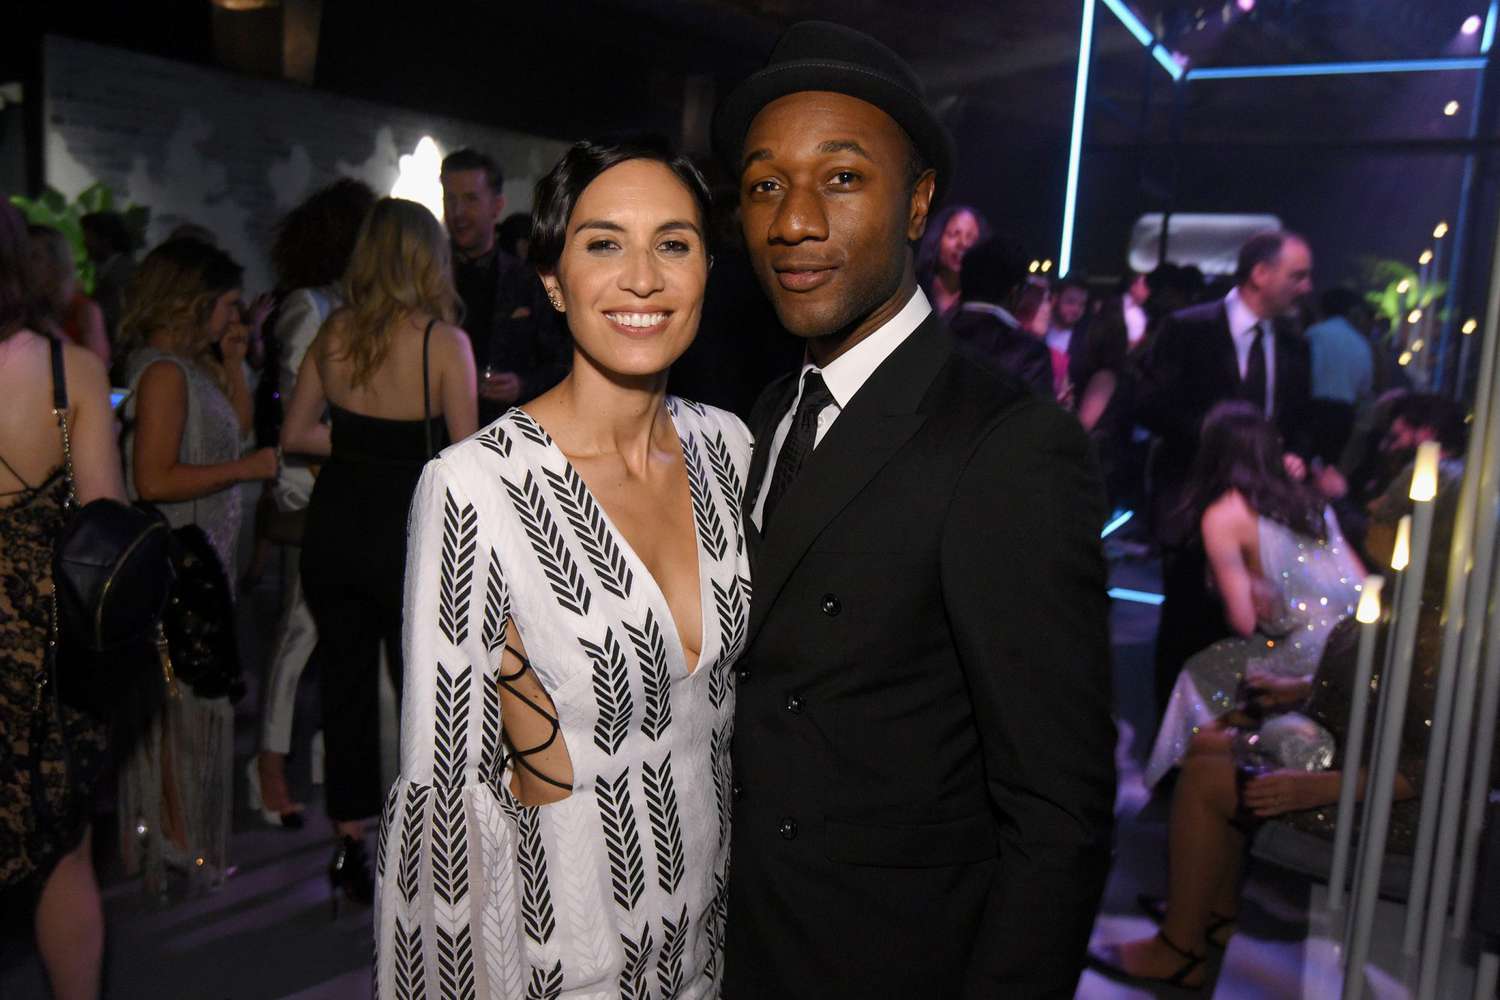 Maya Jupiter and Aloe Blacc&nbsp;at the&nbsp;Universal Music Group 2017 Grammy After Party